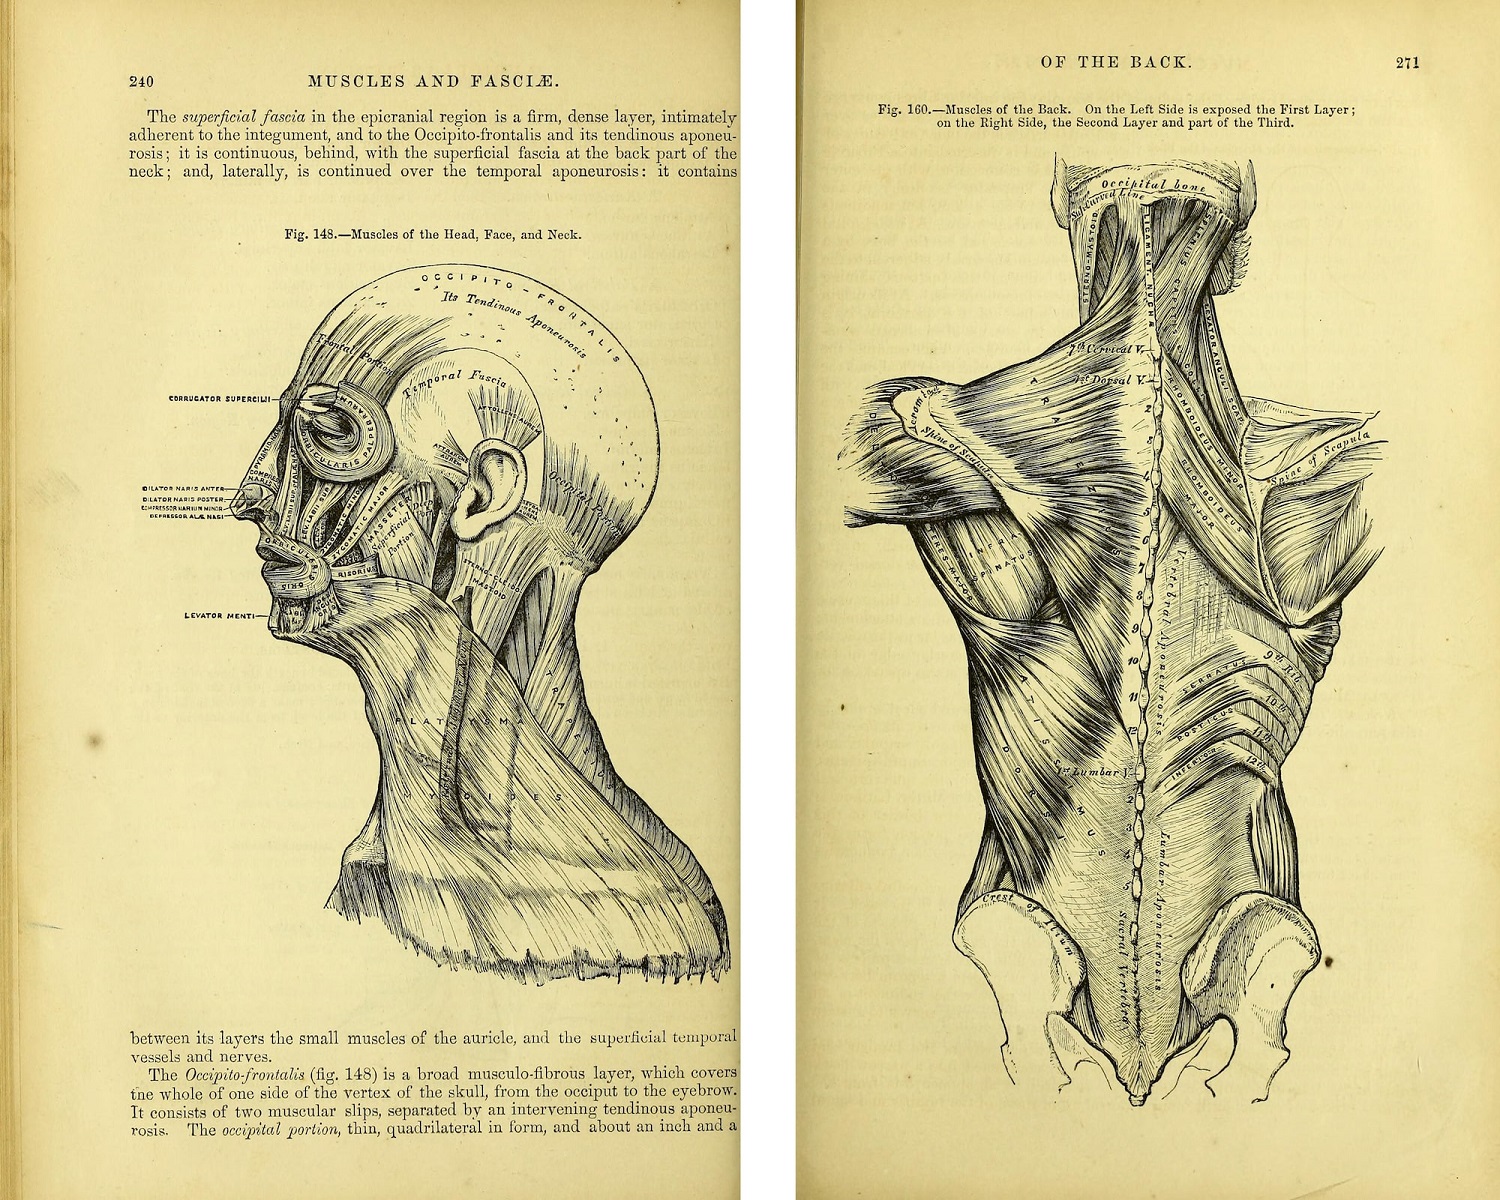 Anatomical illustration of muscles of the head and neck on left and muscles of the back on the right.